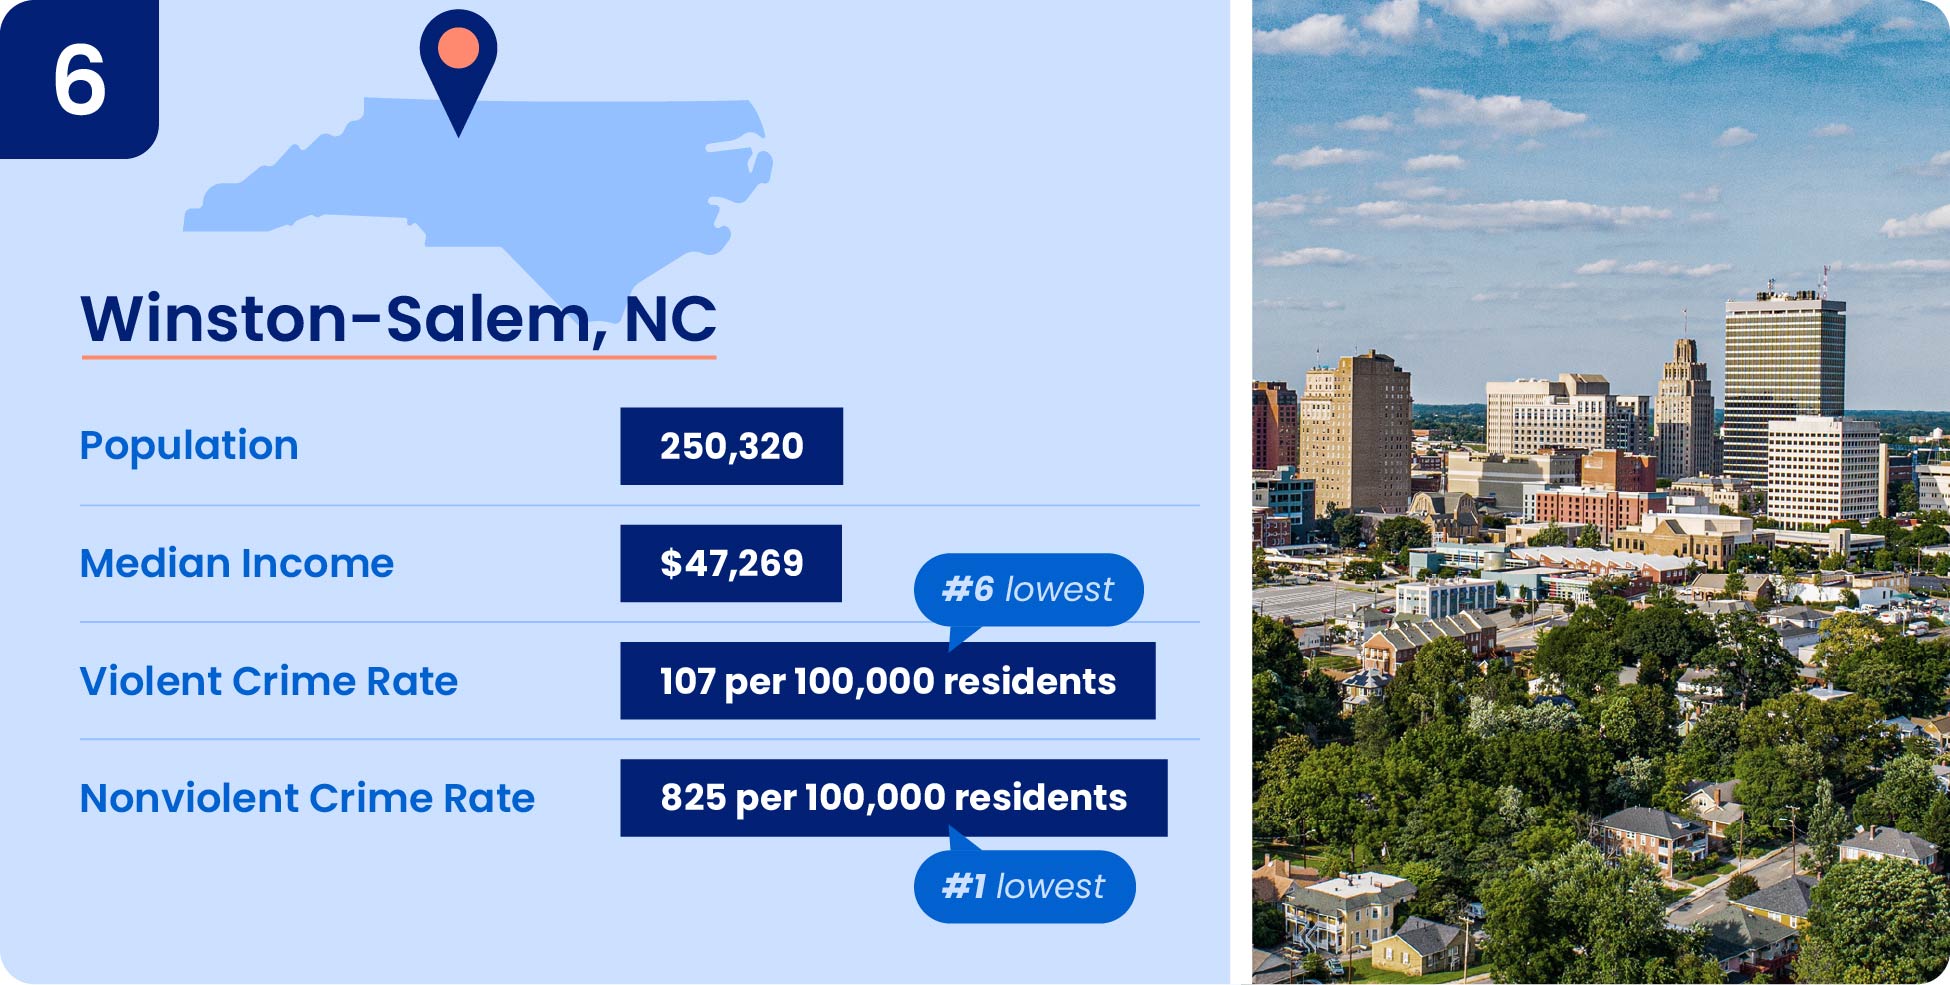 Winston Salem is one of the safest cities in NC